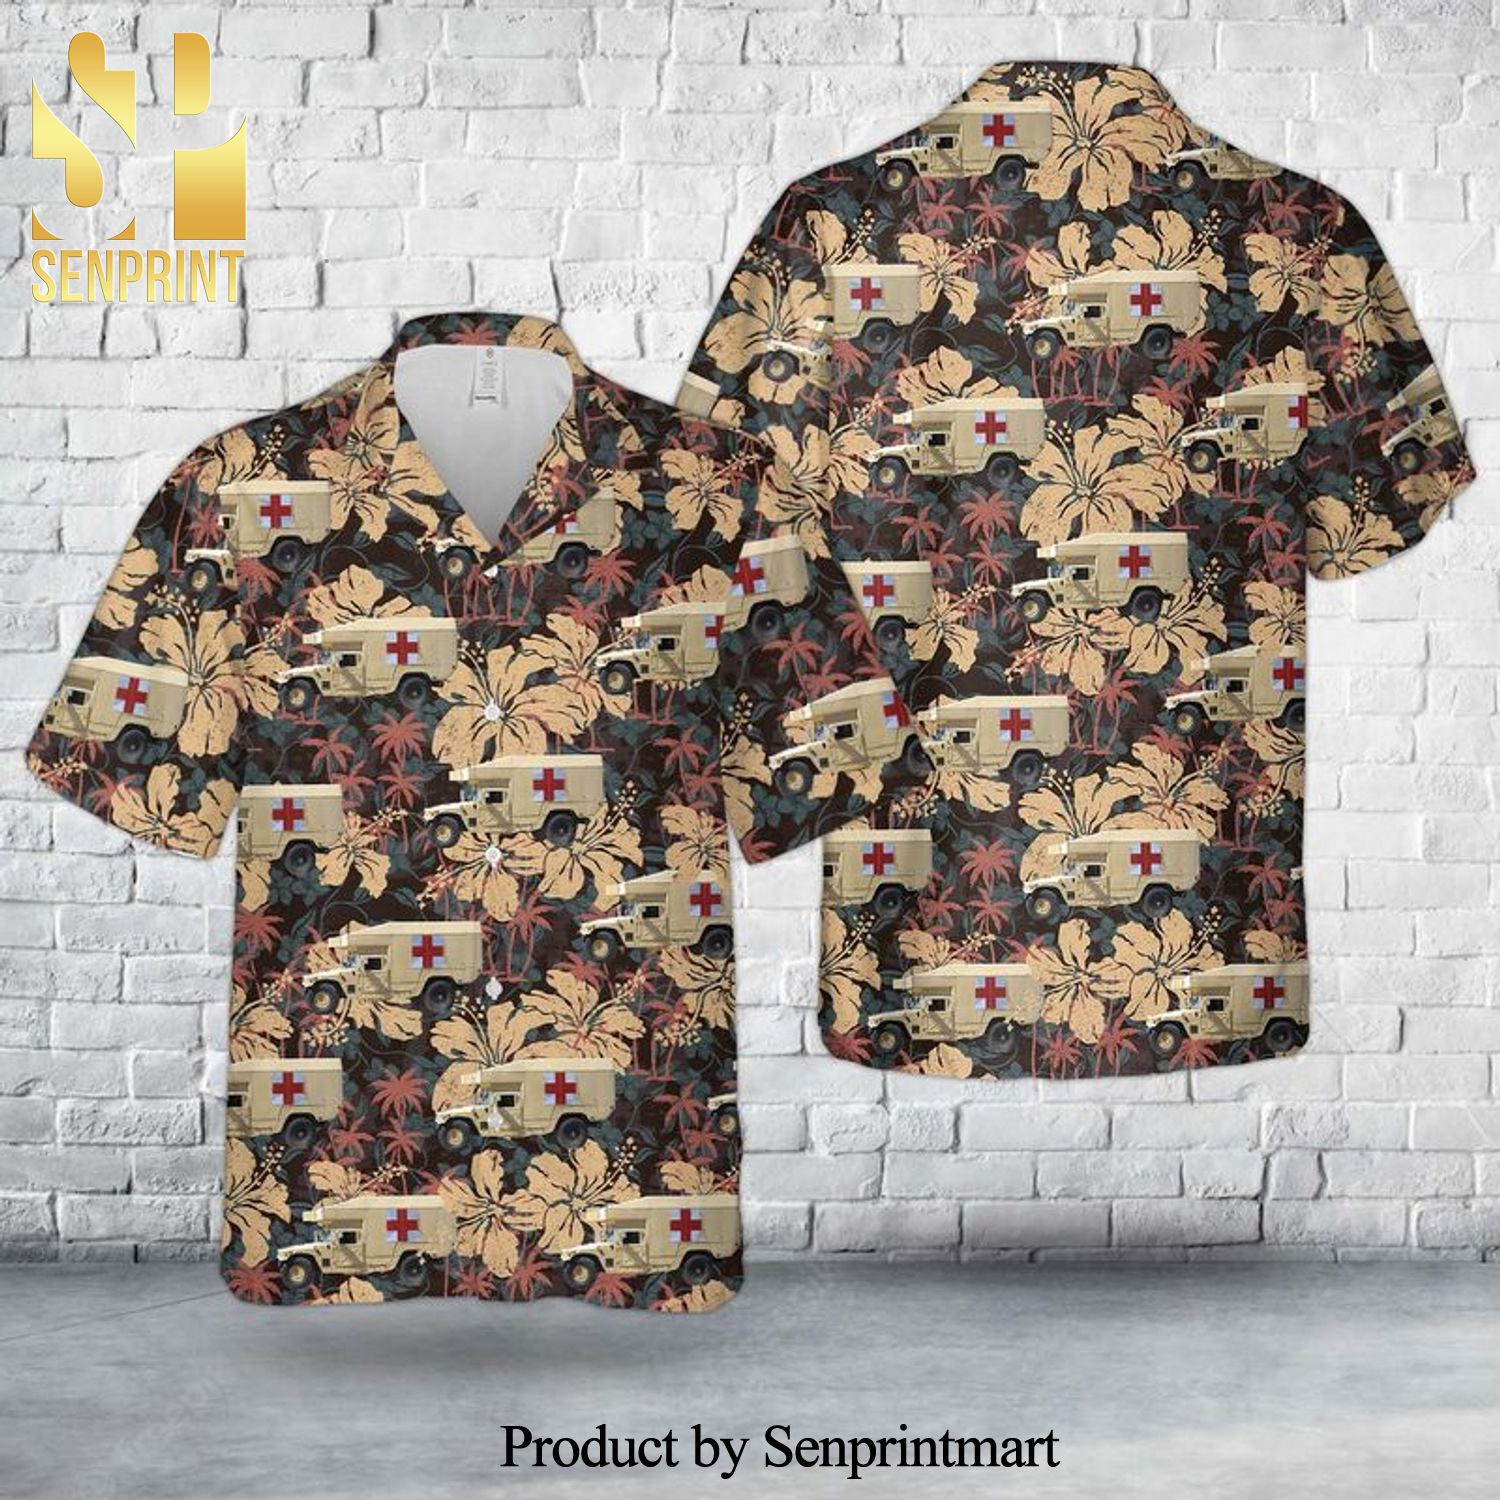 Medical HMMWV M997A3 from the 2-102nd Cavalry of the New Jersey National Guard 50th Infantry Brigade Combat Team Full Print Hawaiian Shirt